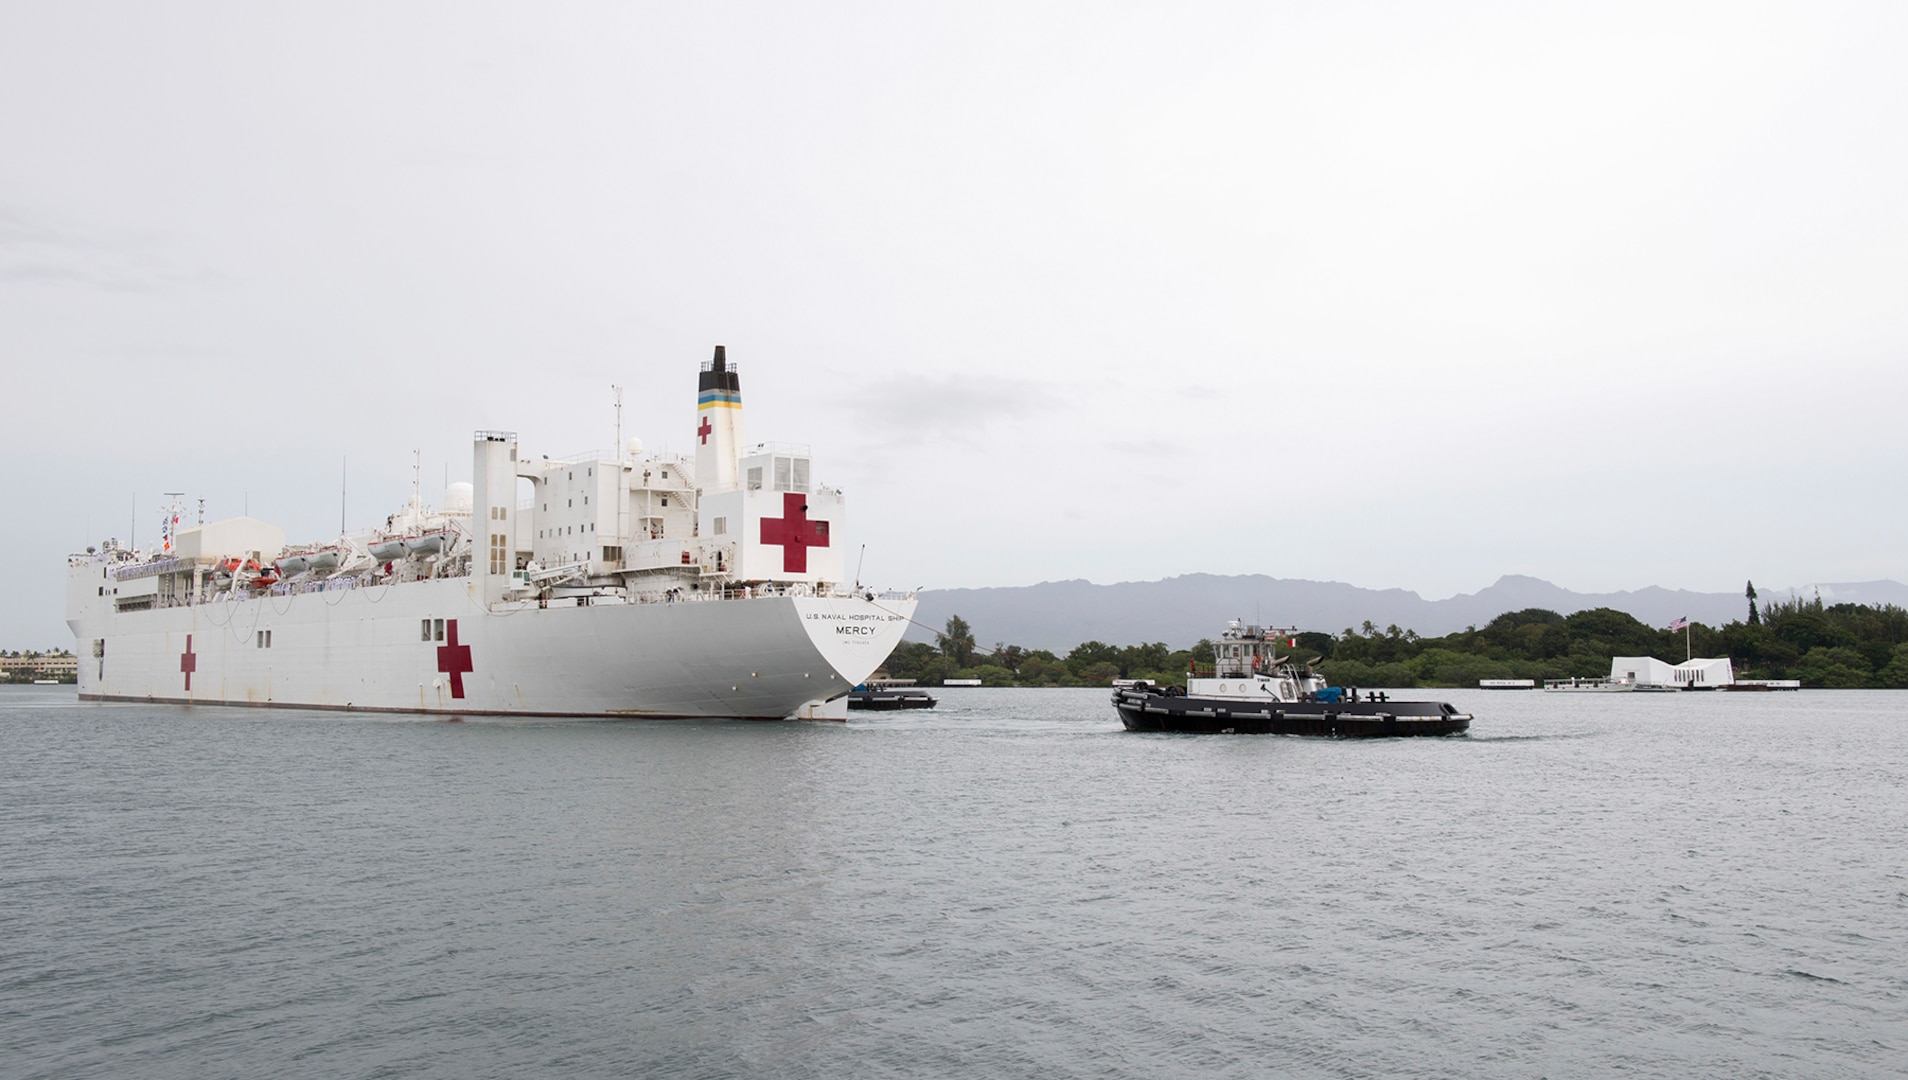 USNS Mercy Arrives in Hawaii, En Route for Pacific Partnership 2018